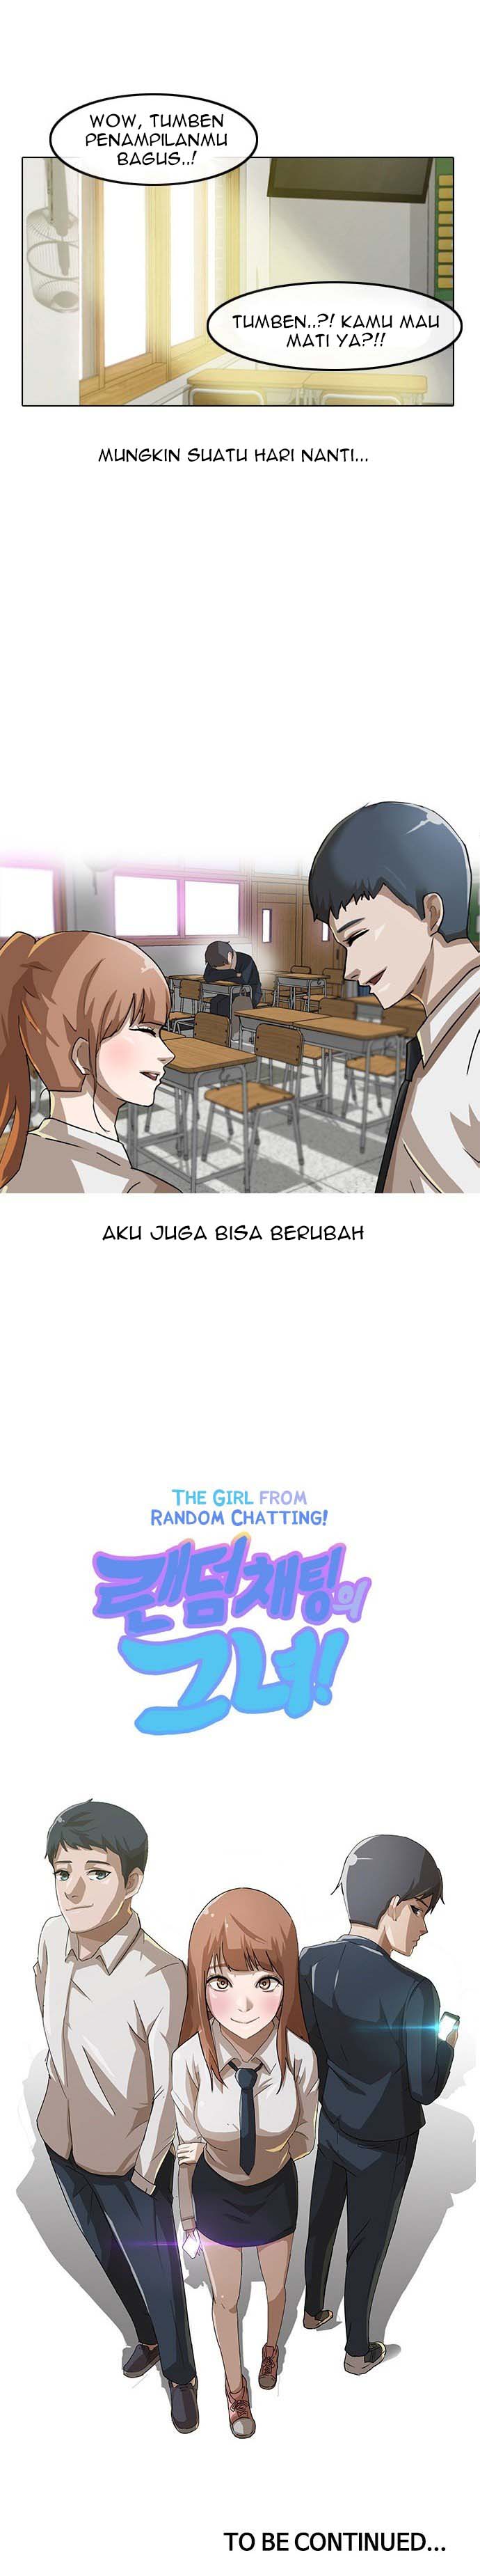 The Girl from Random Chatting! Chapter 3